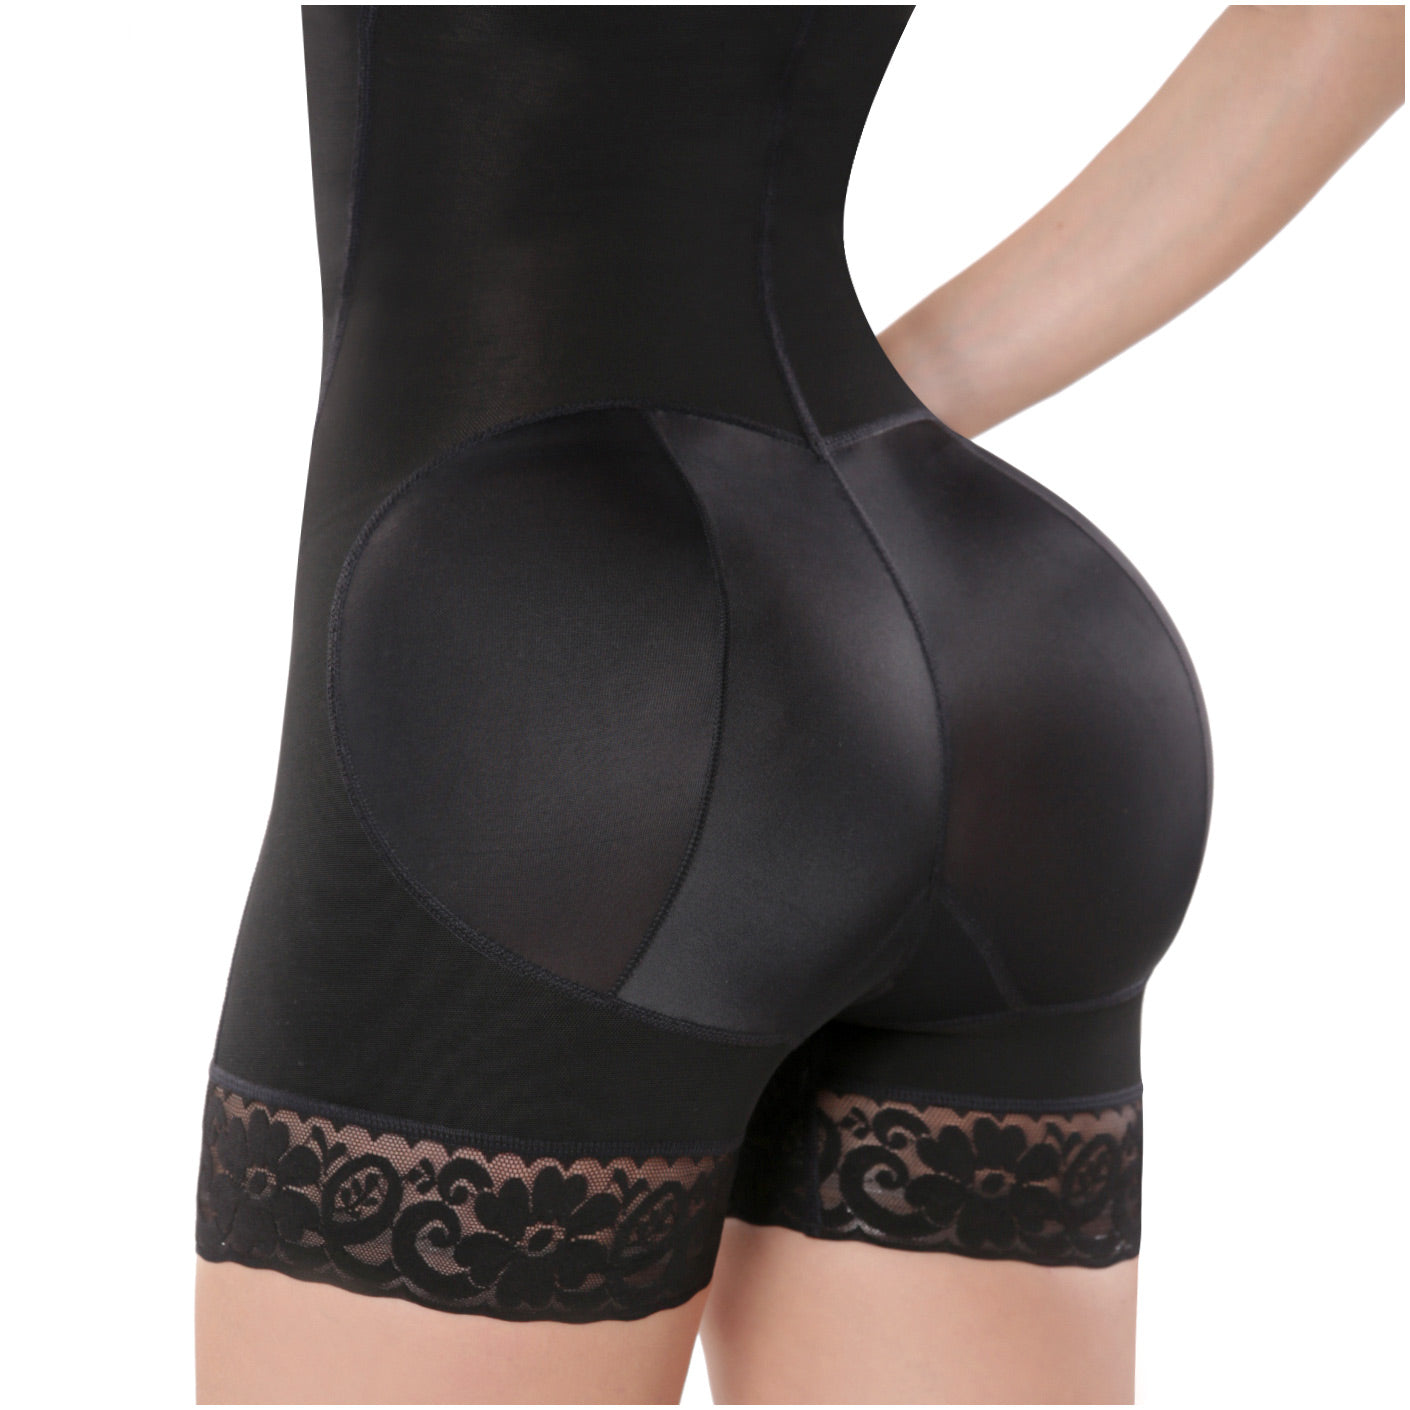 Tummy Tuck Post-Surgery and Daily Use Shapewear with Flat Zipper, Open Bust, & Medium Compression Diane & Geordi 2396-10-Shapes Secrets Fajas